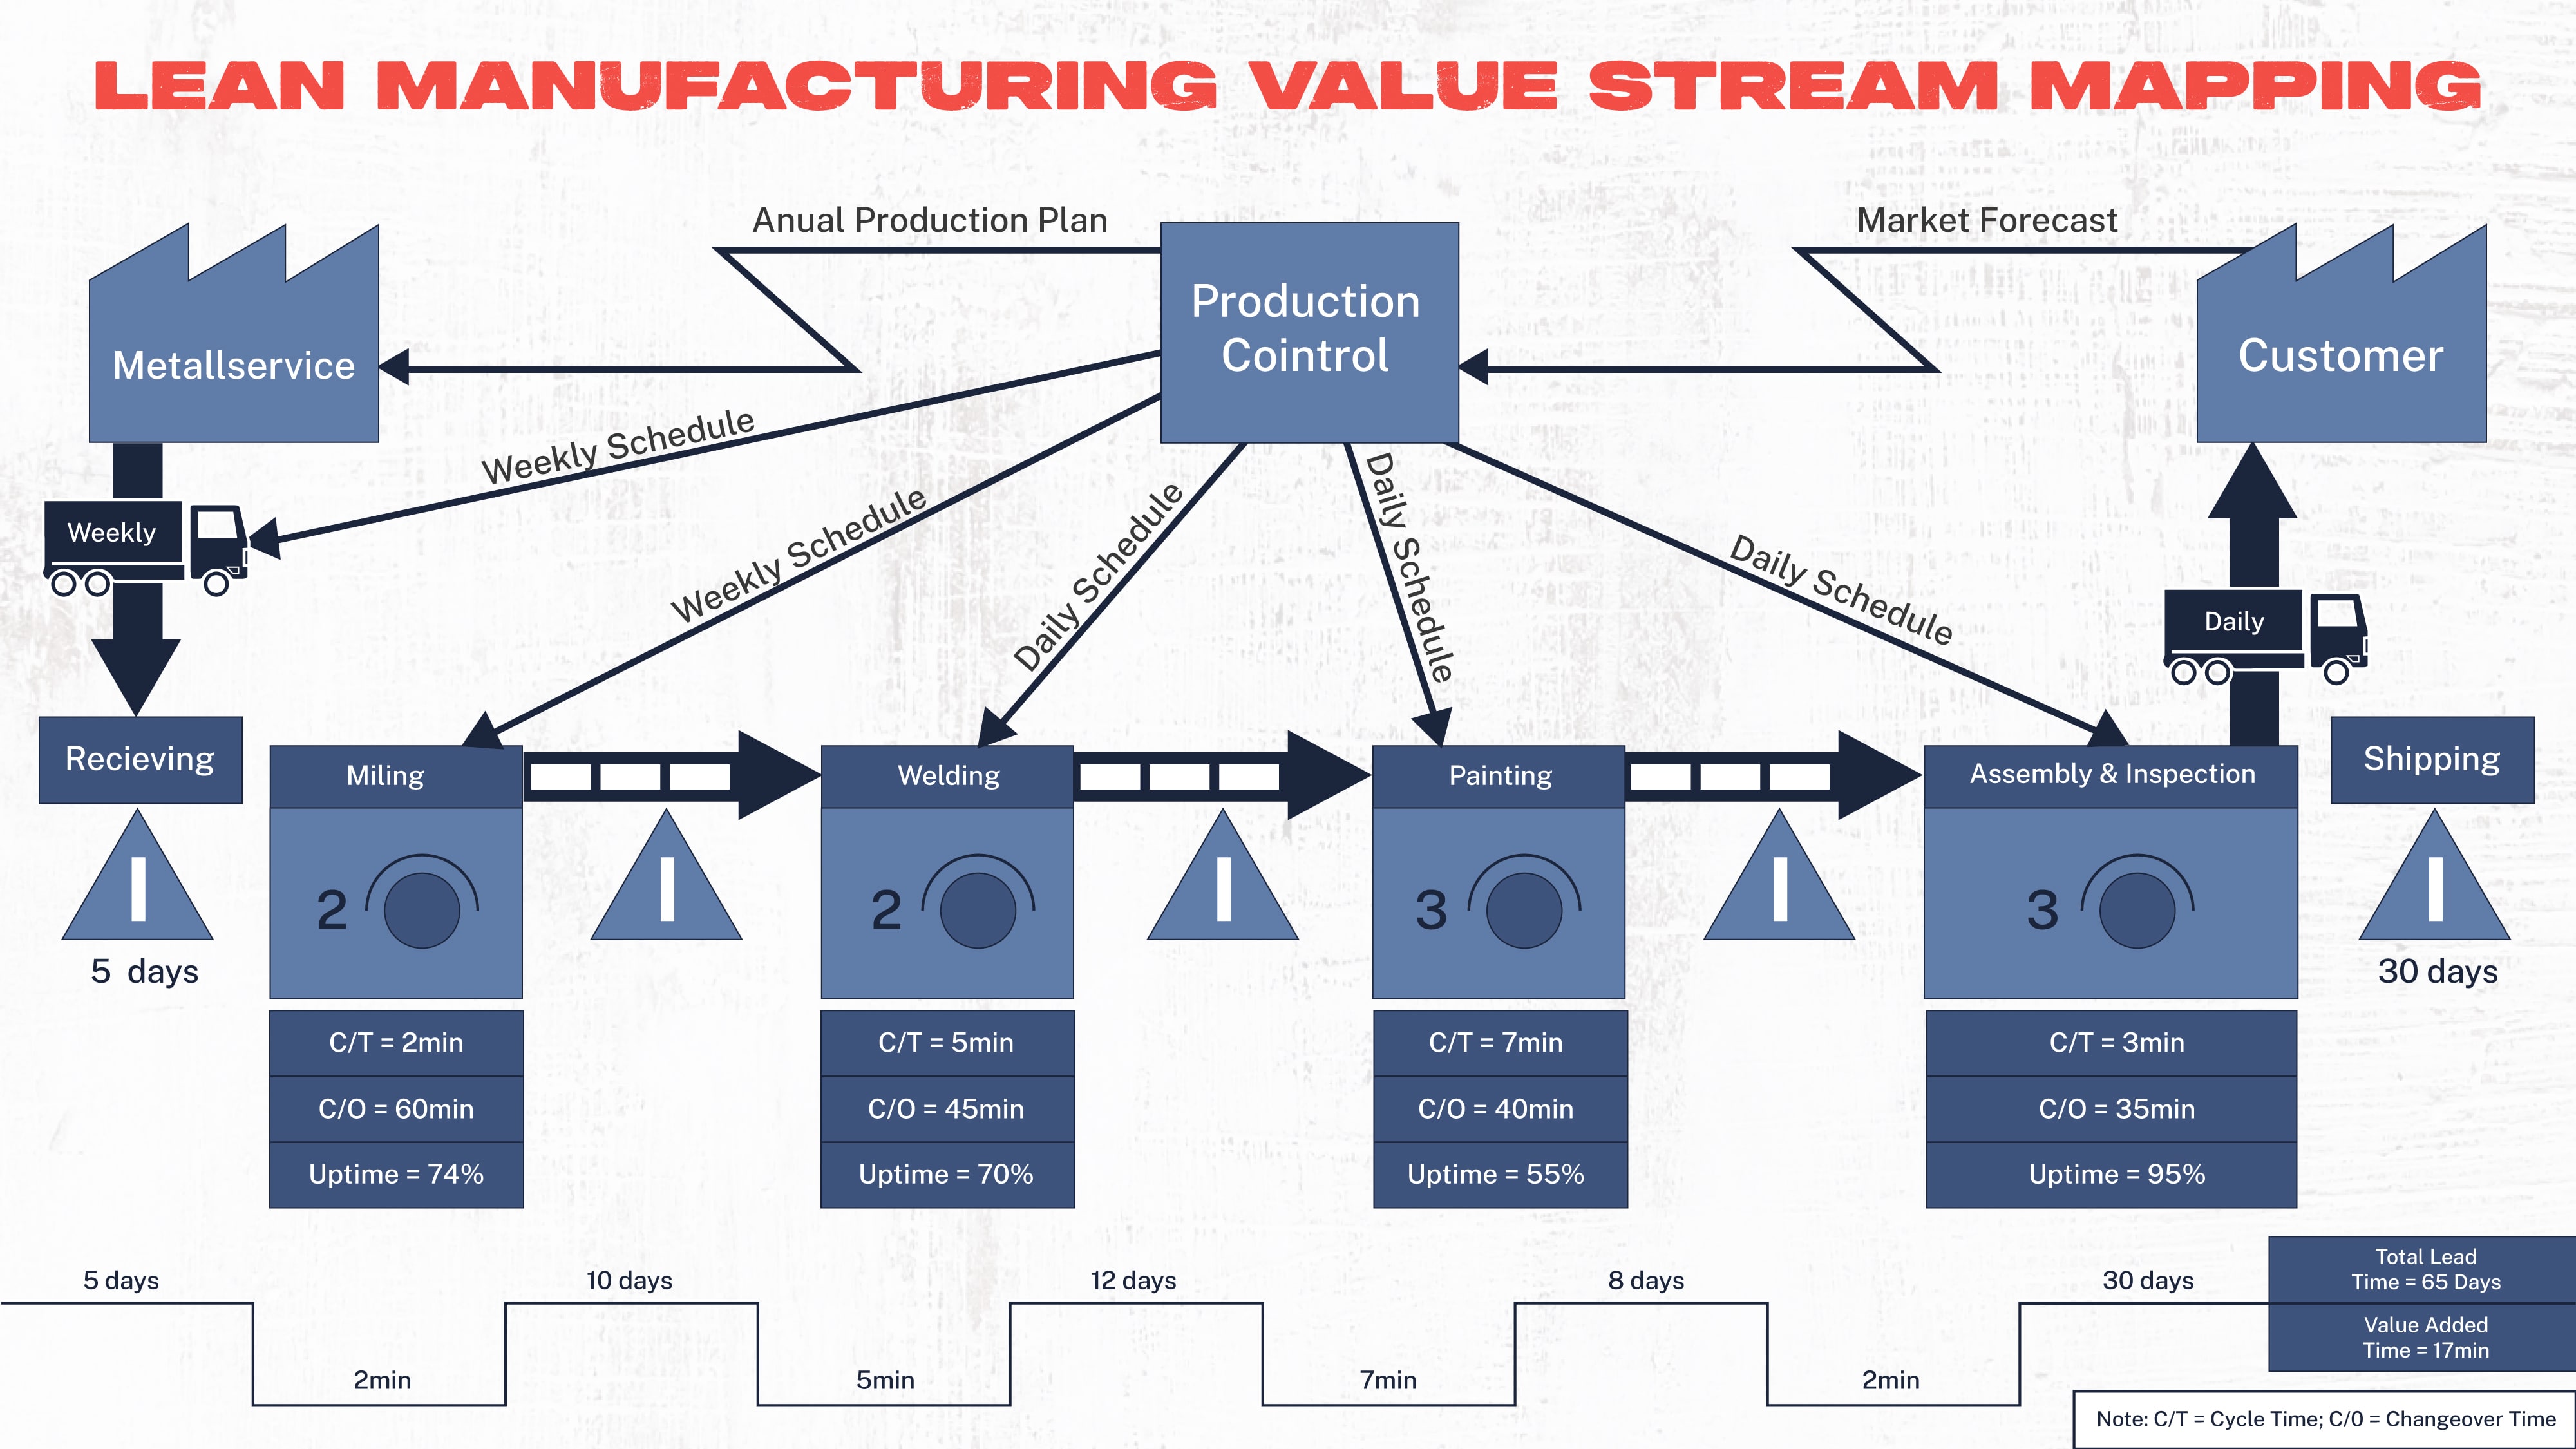 Lean Manufacturing Value Stream Mapping